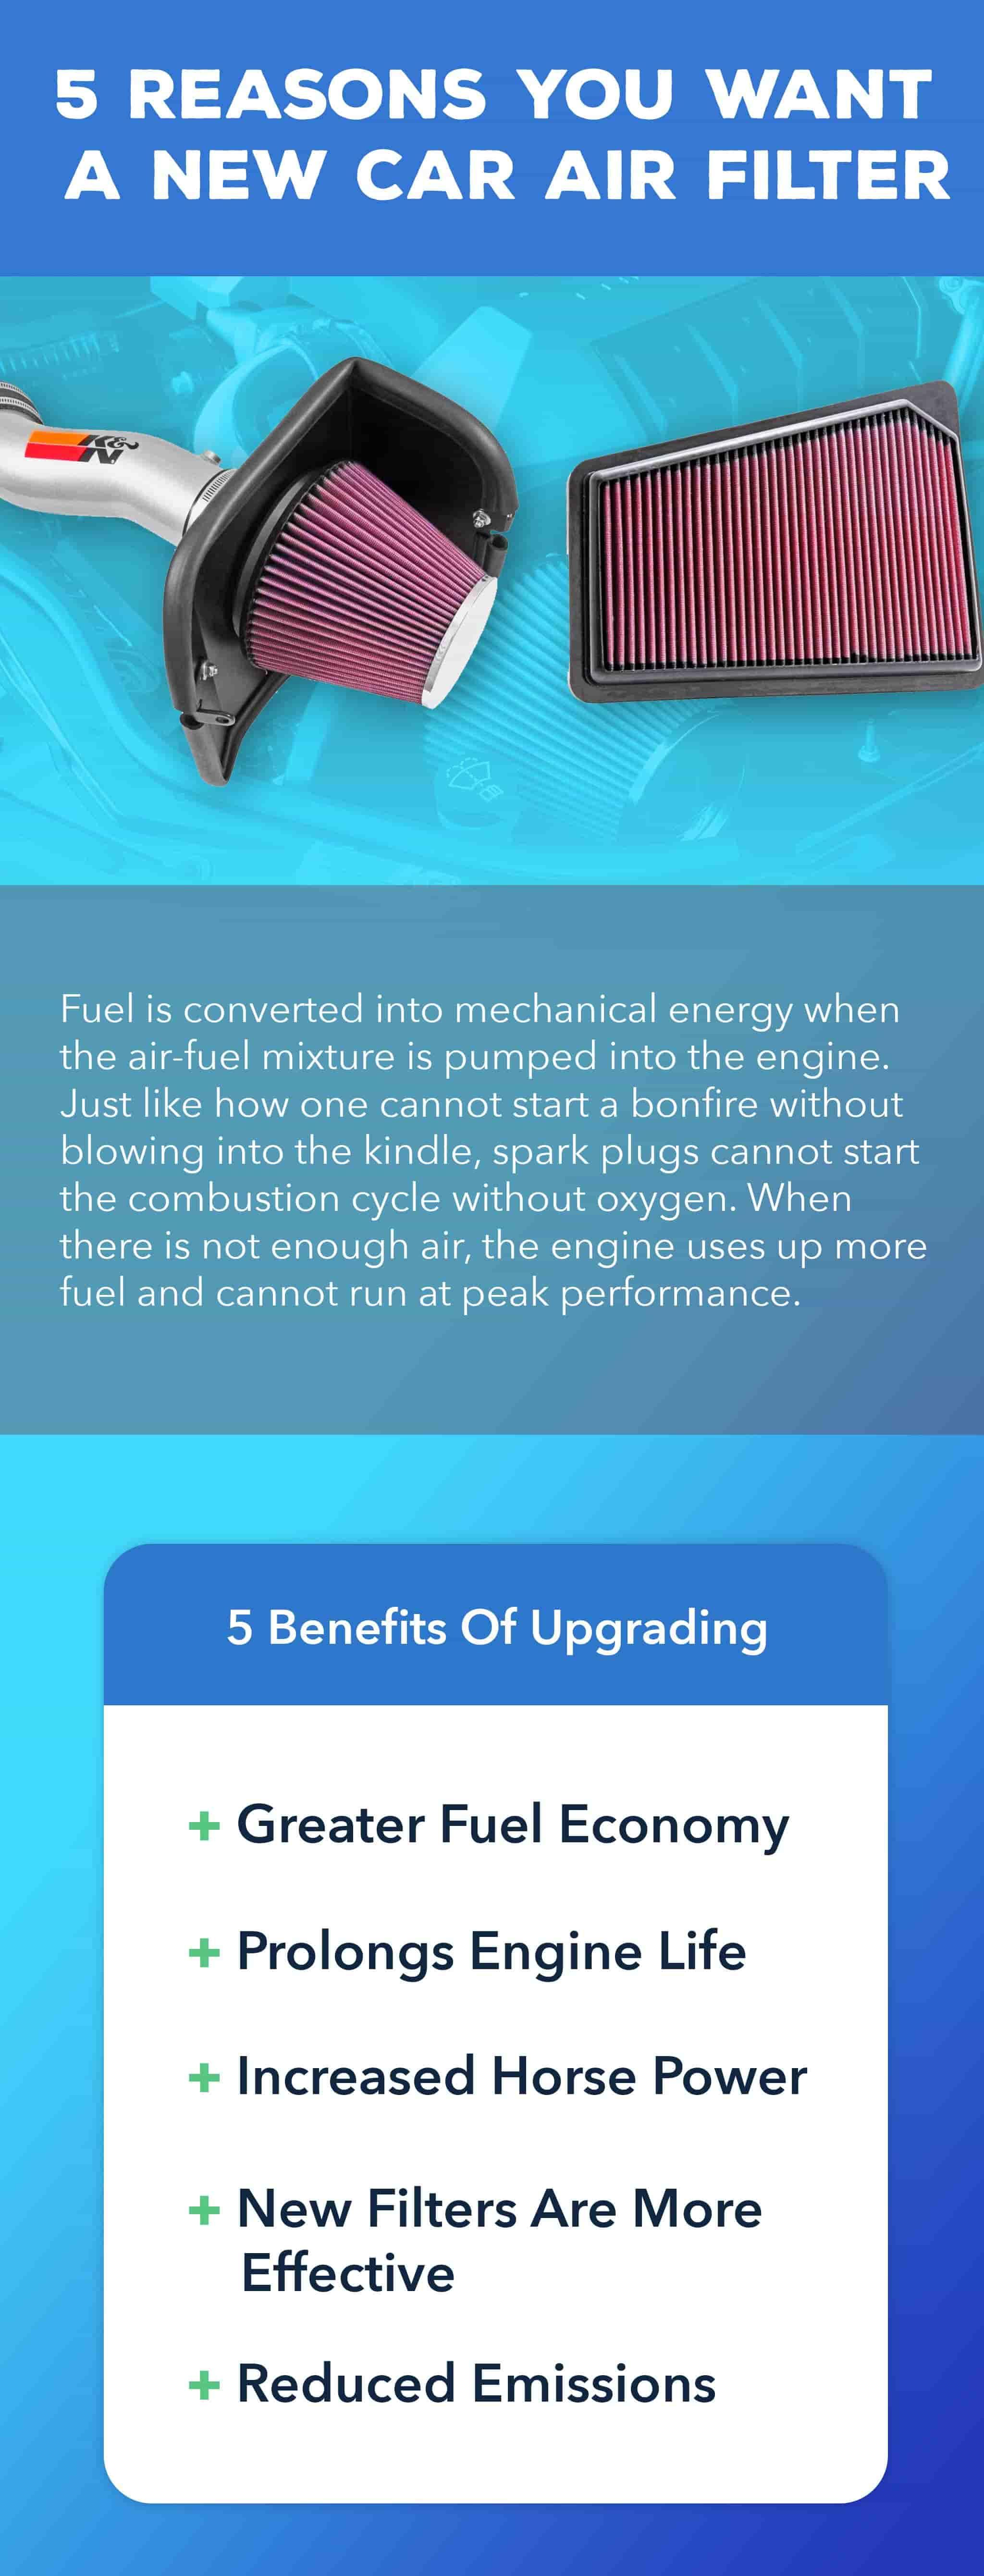 Fuel is converted into mechanical energy when the air-fuel mixture is pumped into the engine. Just like how one cannot start a bonfire without blowing into the kindle, spark plugs cannot start the combustion cycle without oxygen. When there is not enough air, the engine uses up more fuel and cannot run at peak performance.